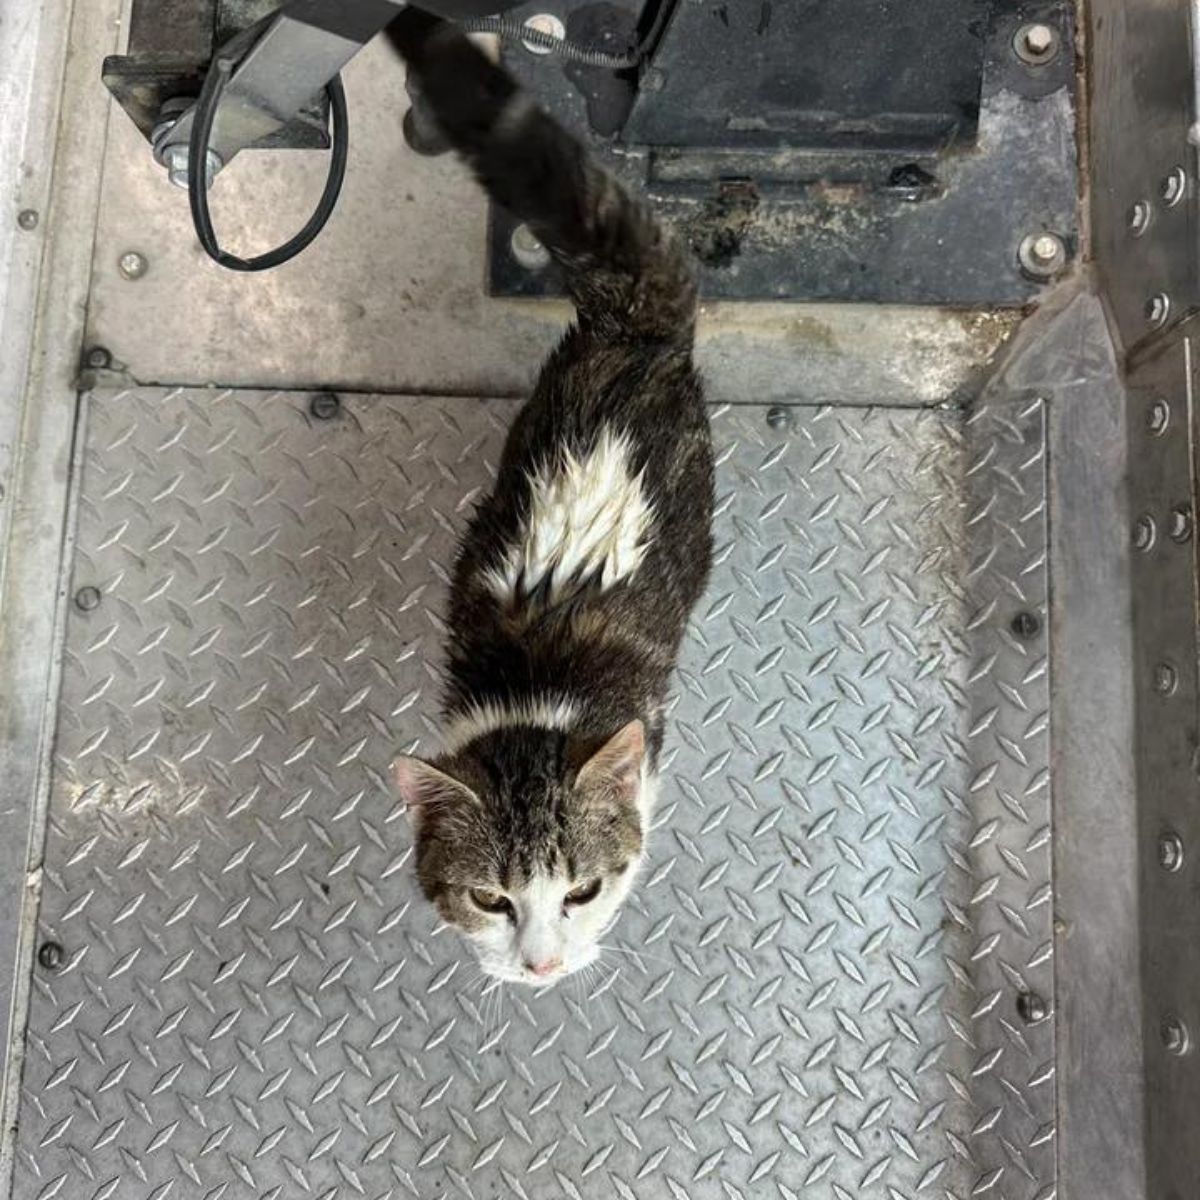 cat went out from a hole in a truck